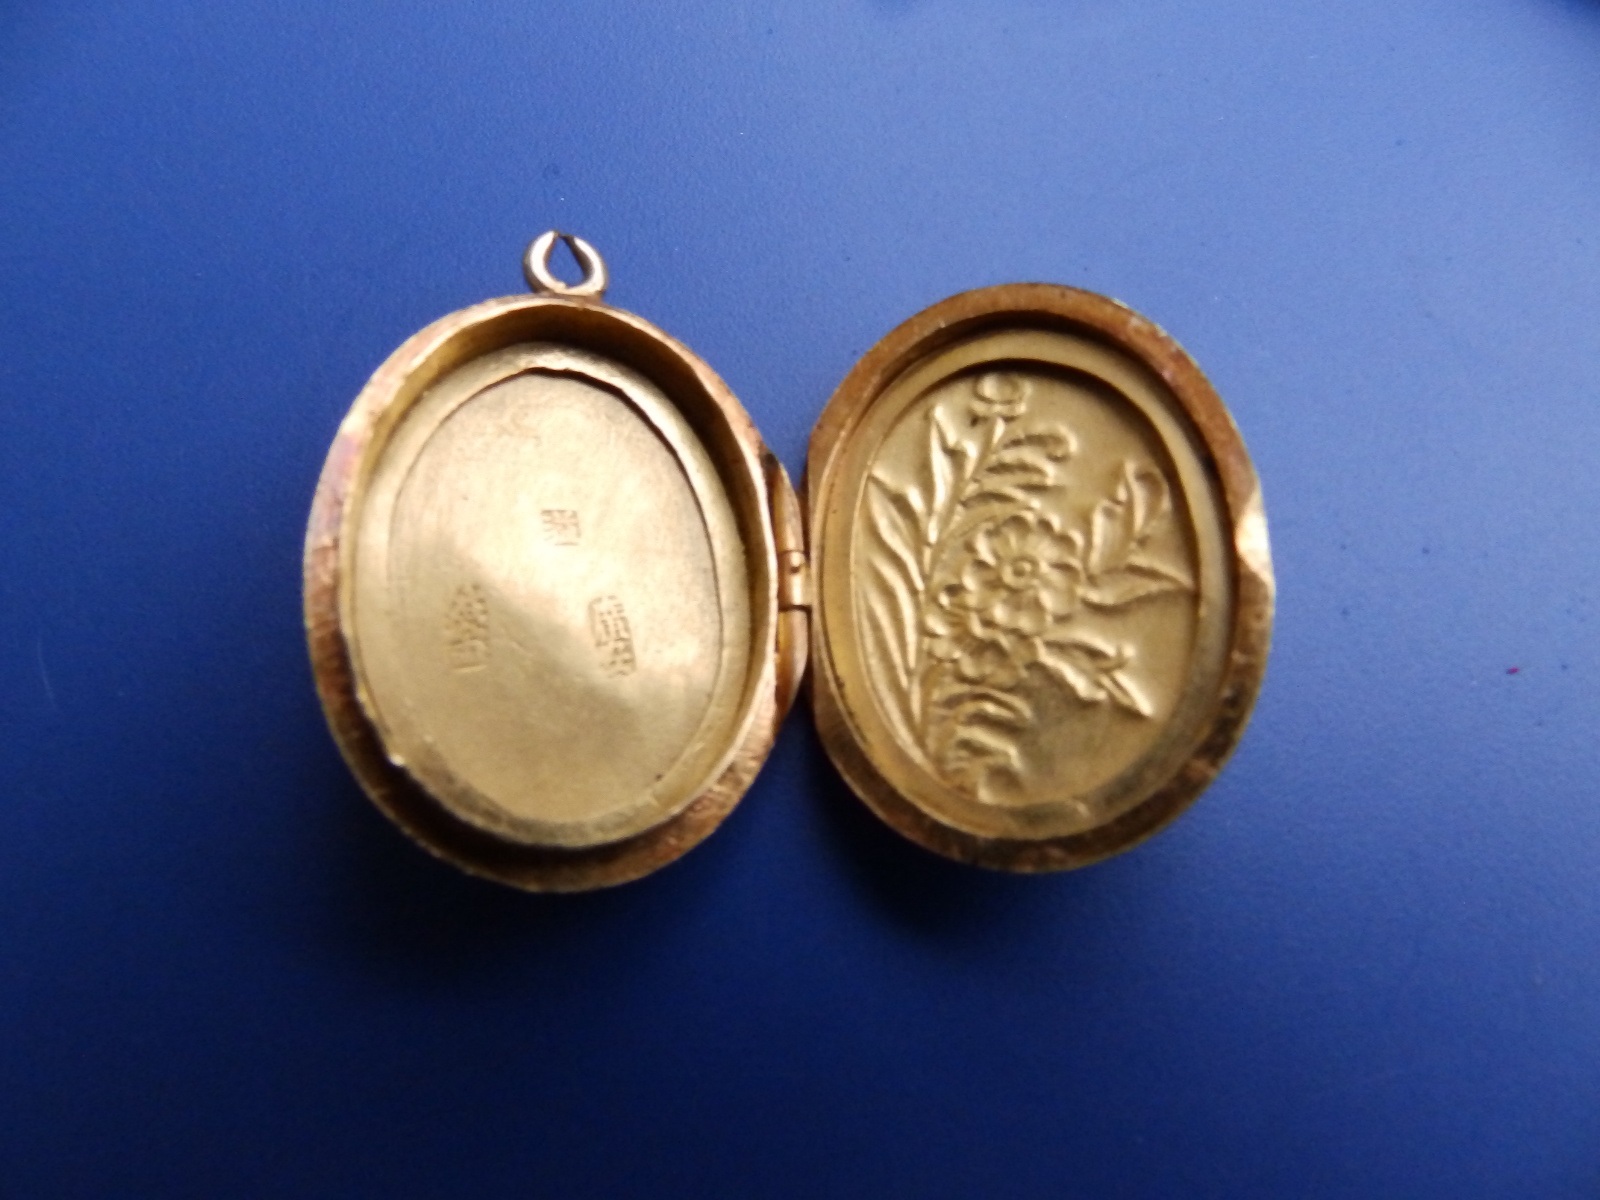 A small Chinese oval gold locket, 1.1" excluding loop - tests as 22ct, together with two small